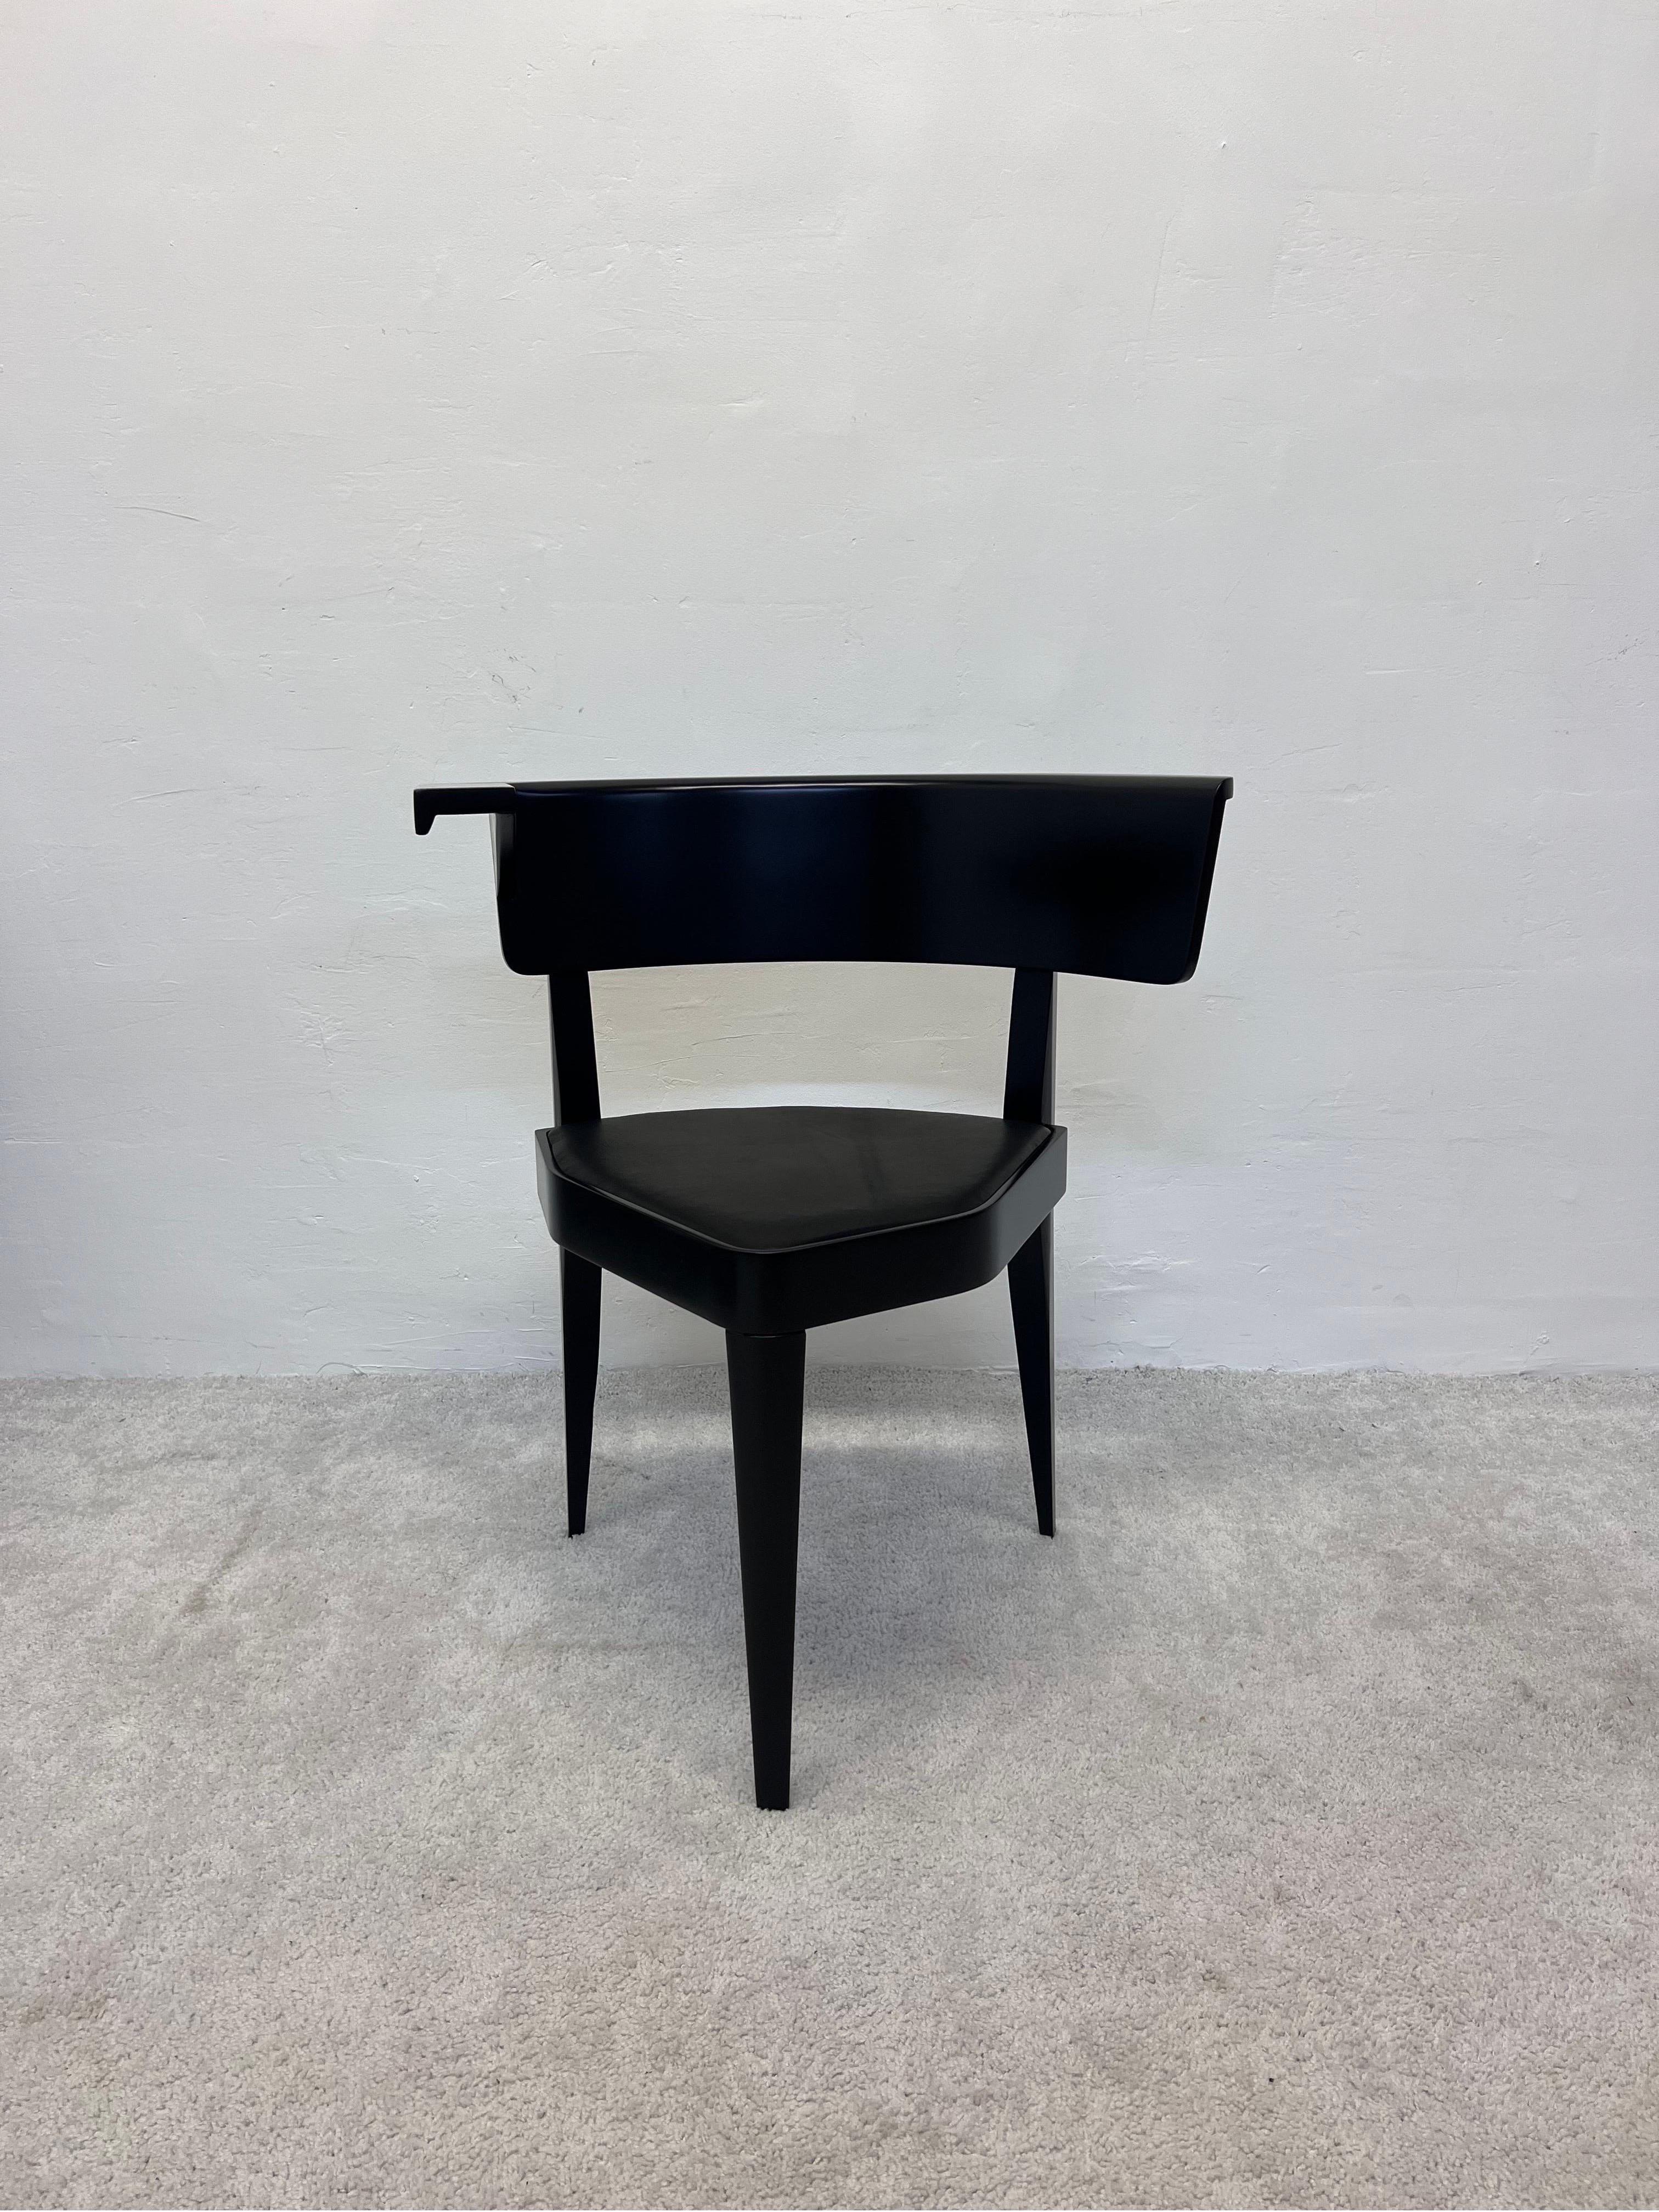 Fully restored three legged, asymmetric B1 chair by Stefan Wewerka for Tecta. Originally designed in 1979, this example is from circa 1980s. Cushioned soft black leather seat fits snugly in a satin black lacquered frame.

The B1 stands solidly on